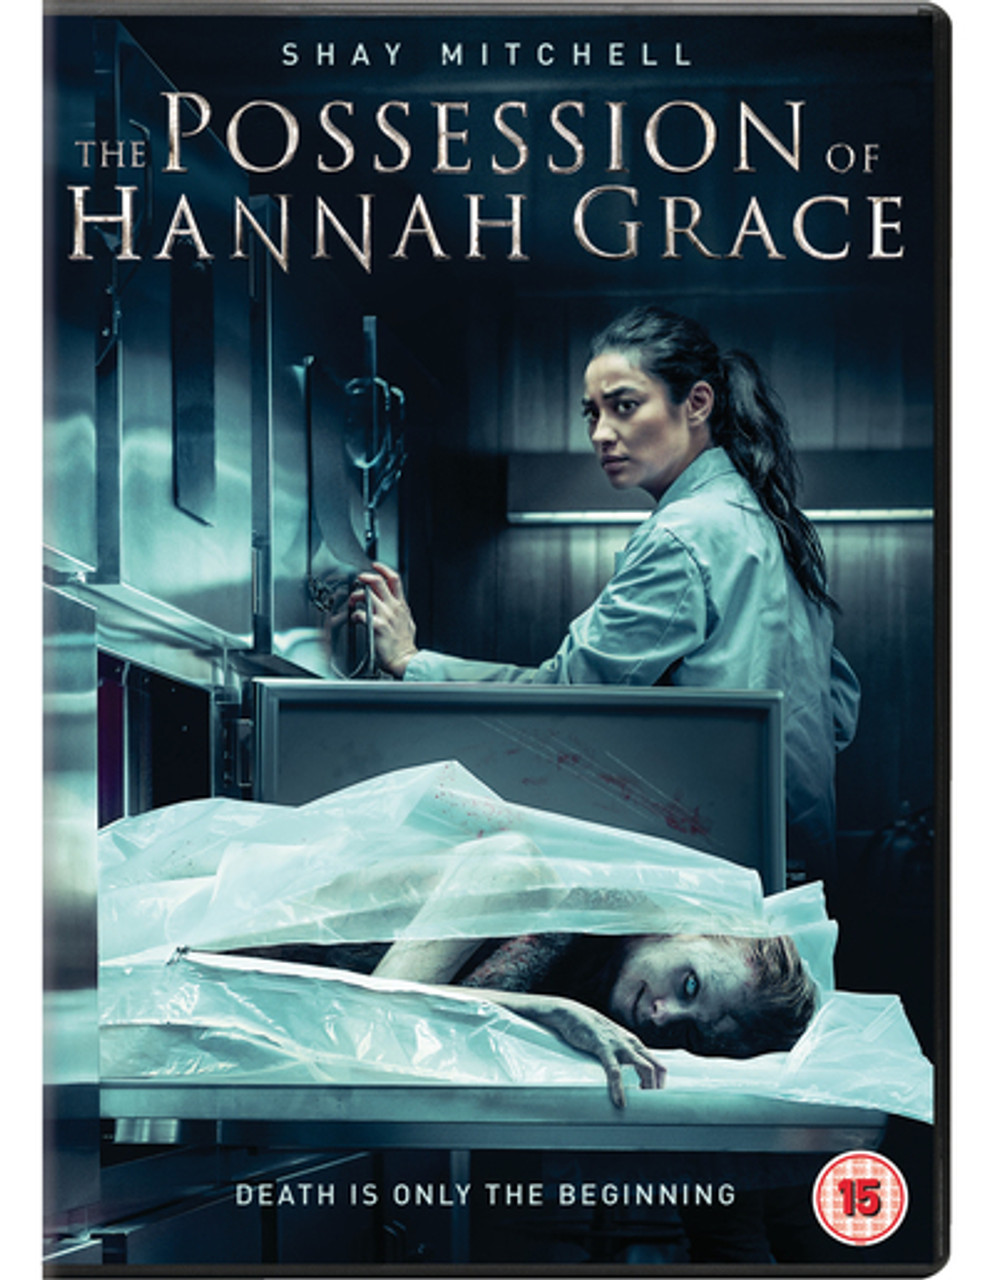 Movie Review: “The Possession of Hannah Grace”